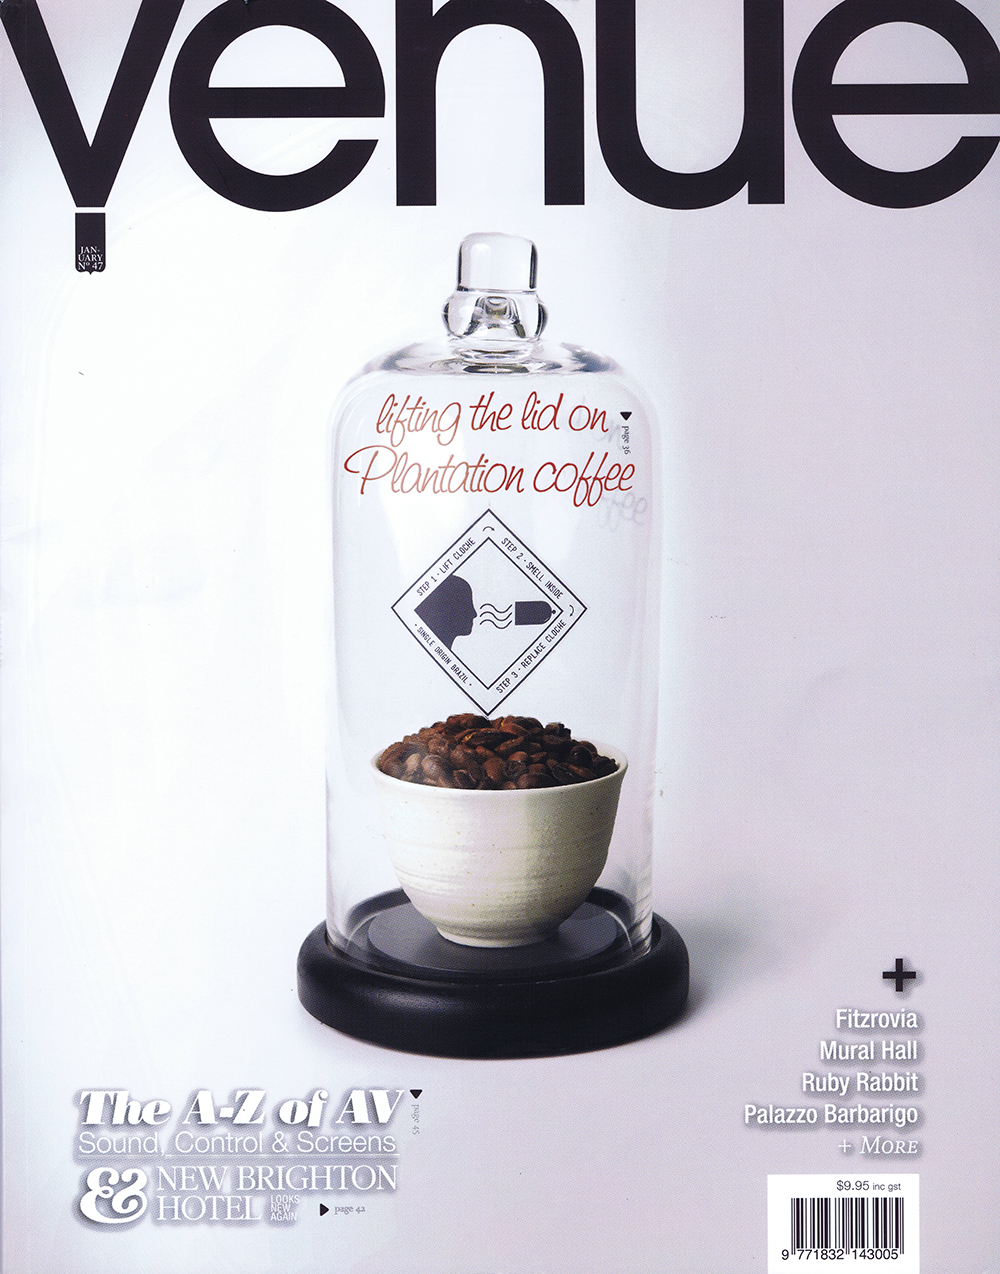 Venue mag_47_cover_email.jpg